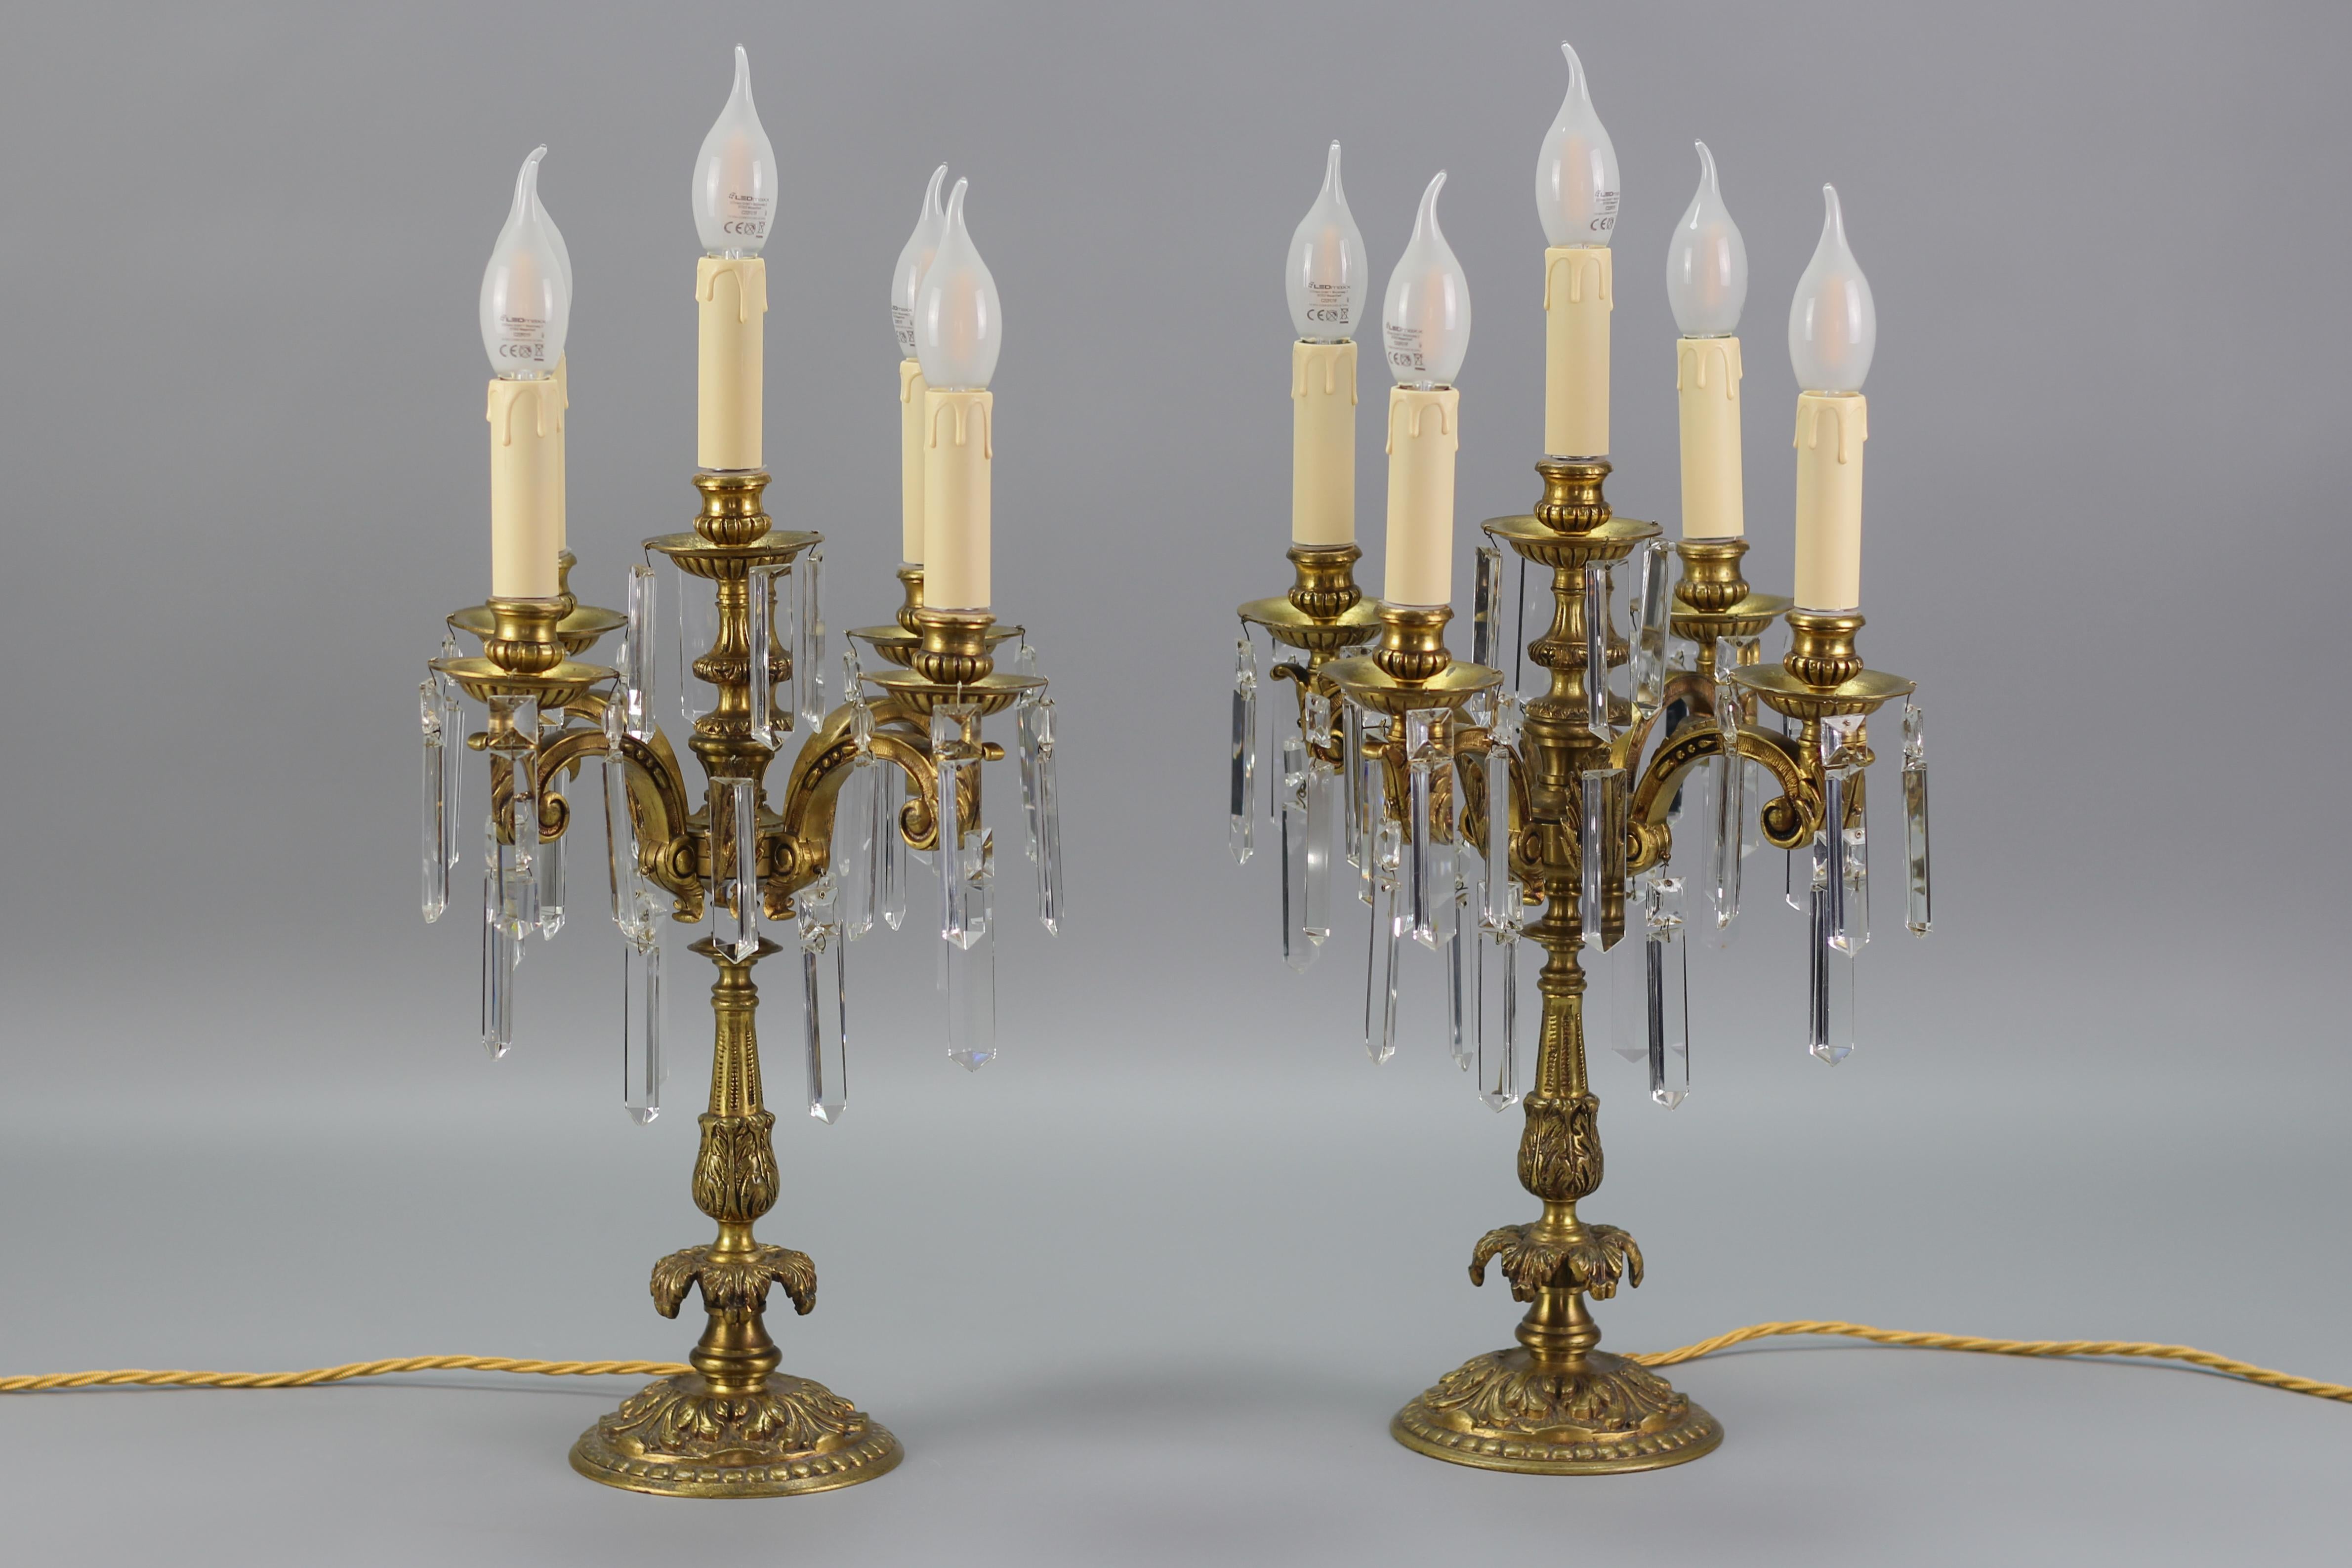 Early 20th Century French Louis XVI Style Bronze and Crystal Candelabra Table Lamps, Set of 2 For Sale